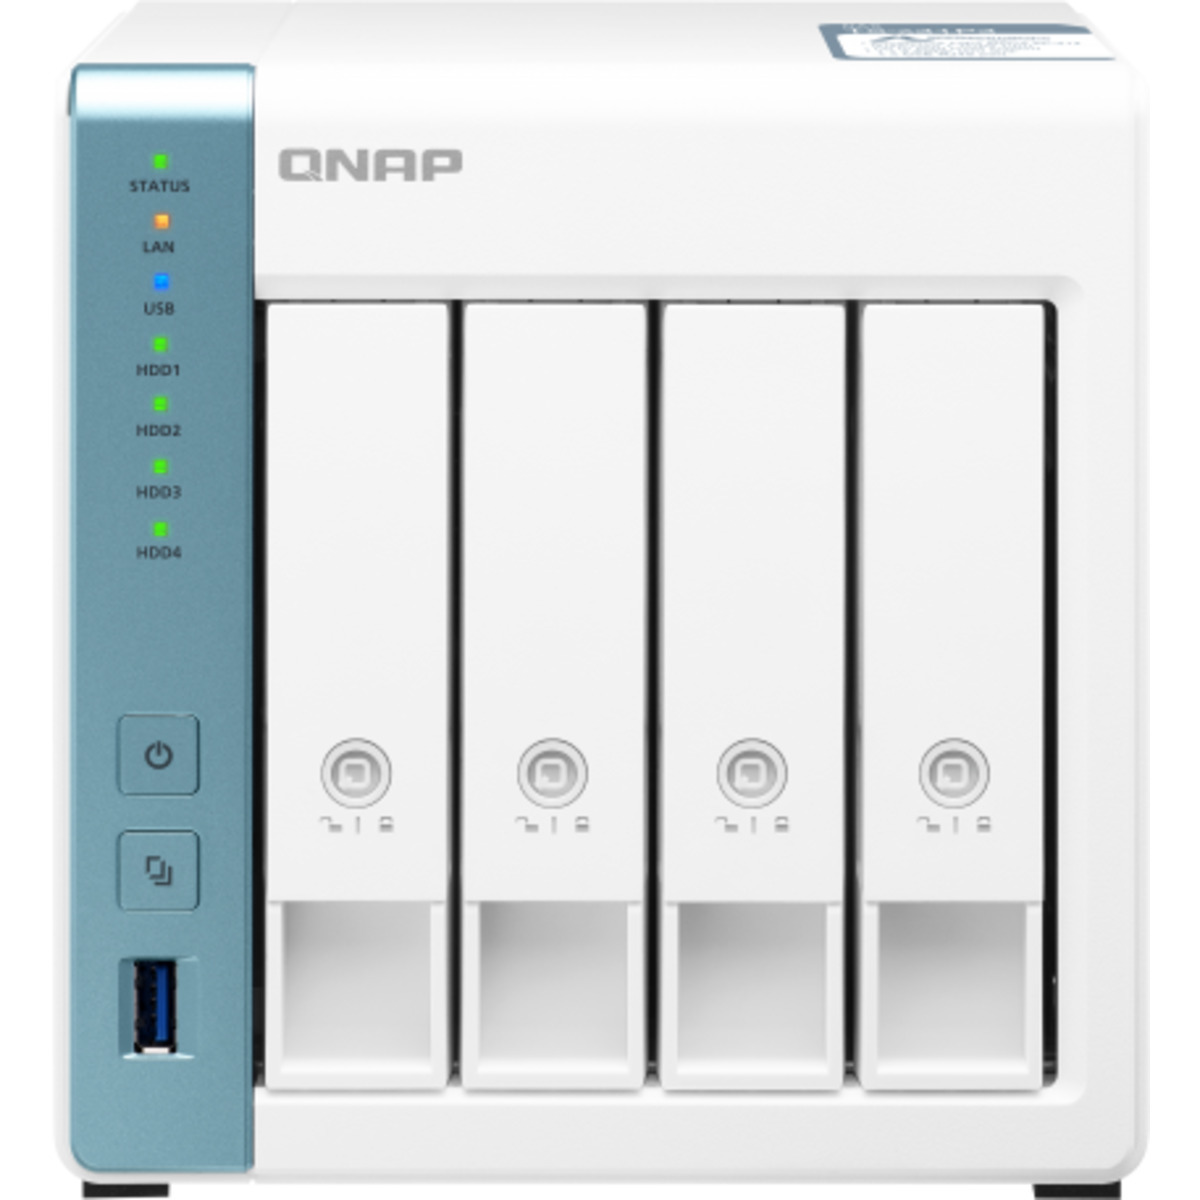 buy $1581 QNAP TS-431P3 8tb Desktop NAS - Network Attached Storage Device 4x2000gb Western Digital Red SA500 WDS200T1R0A 2.5 560/530MB/s SATA 6Gb/s SSD NAS Class Drives Installed - Burn-In Tested - FREE RAM UPGRADE - nas headquarters buy network attached storage server device das new raid-5 free shipping usa TS-431P3